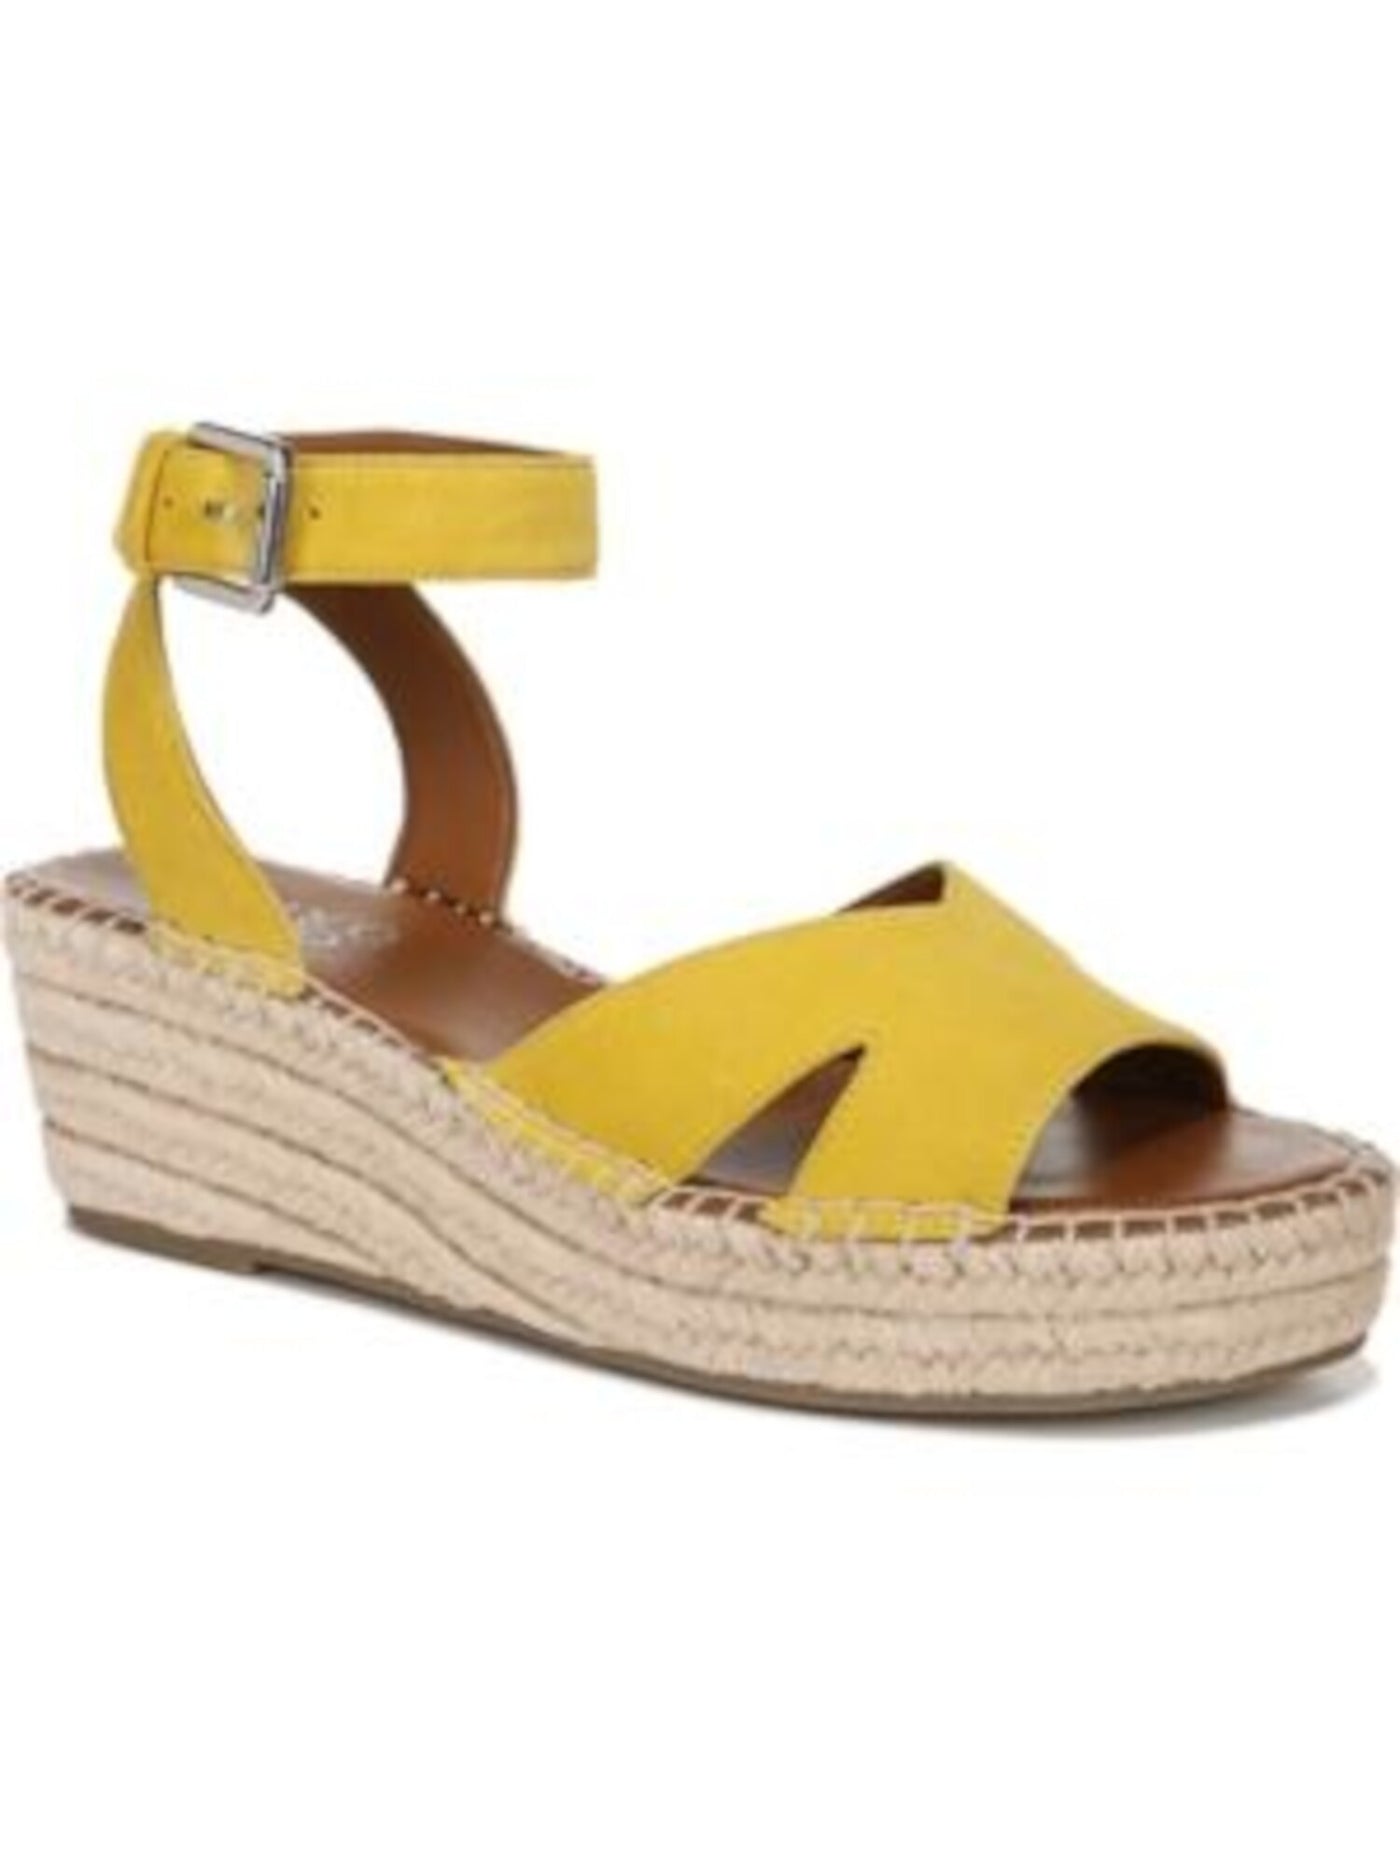 FRANCO SARTO Womens Yellow 1" Platform Ankle Strap Comfort Pellia Round Toe Wedge Buckle Leather Espadrille Shoes 7 M